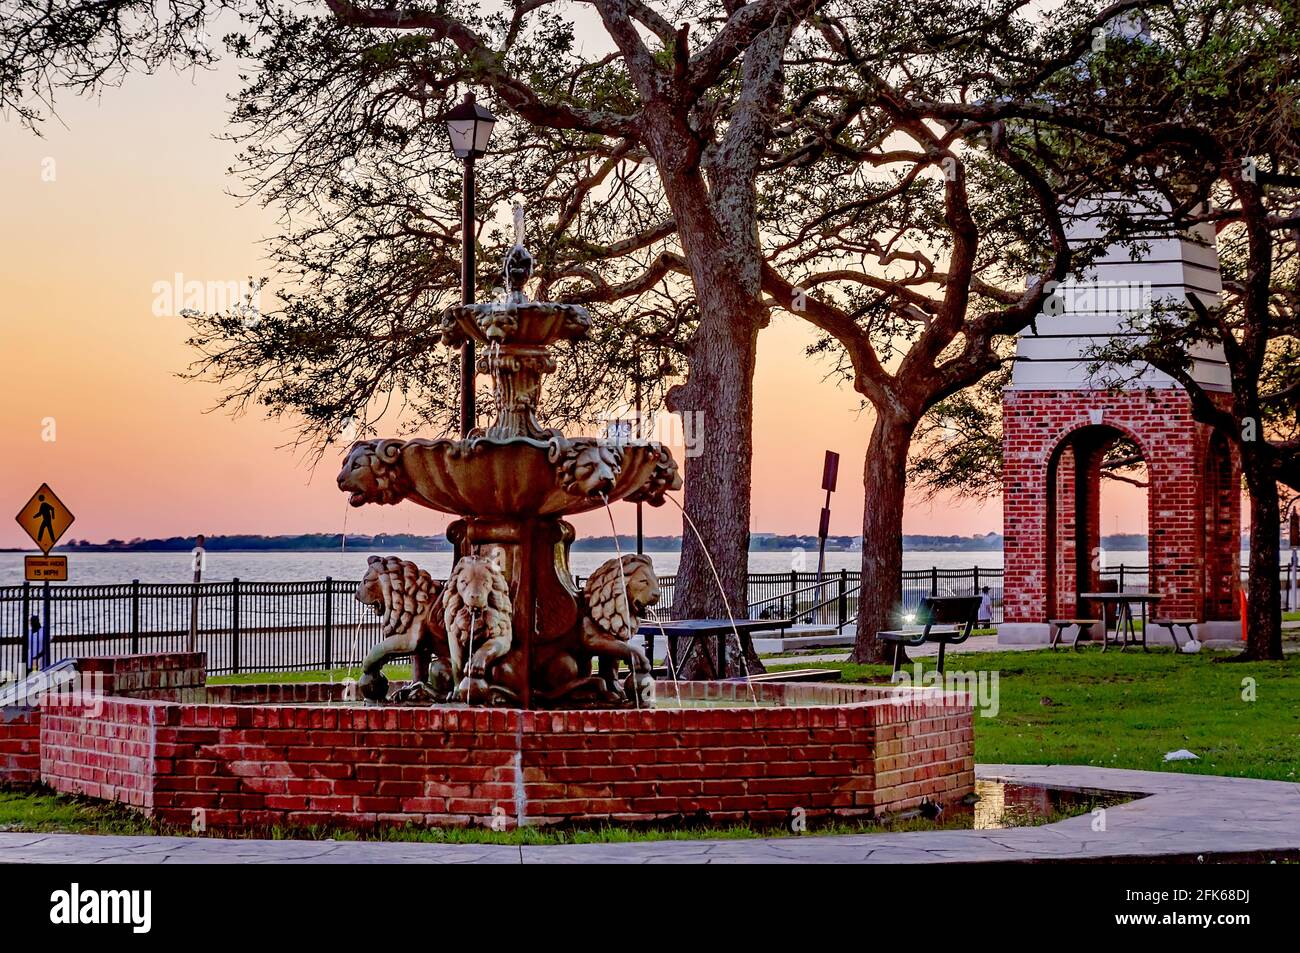 The Sharda Mangal Memorial Fountain is pictured at sunset at Beach Park, April 25, 2021, in Pascagoula, Mississippi. Stock Photo